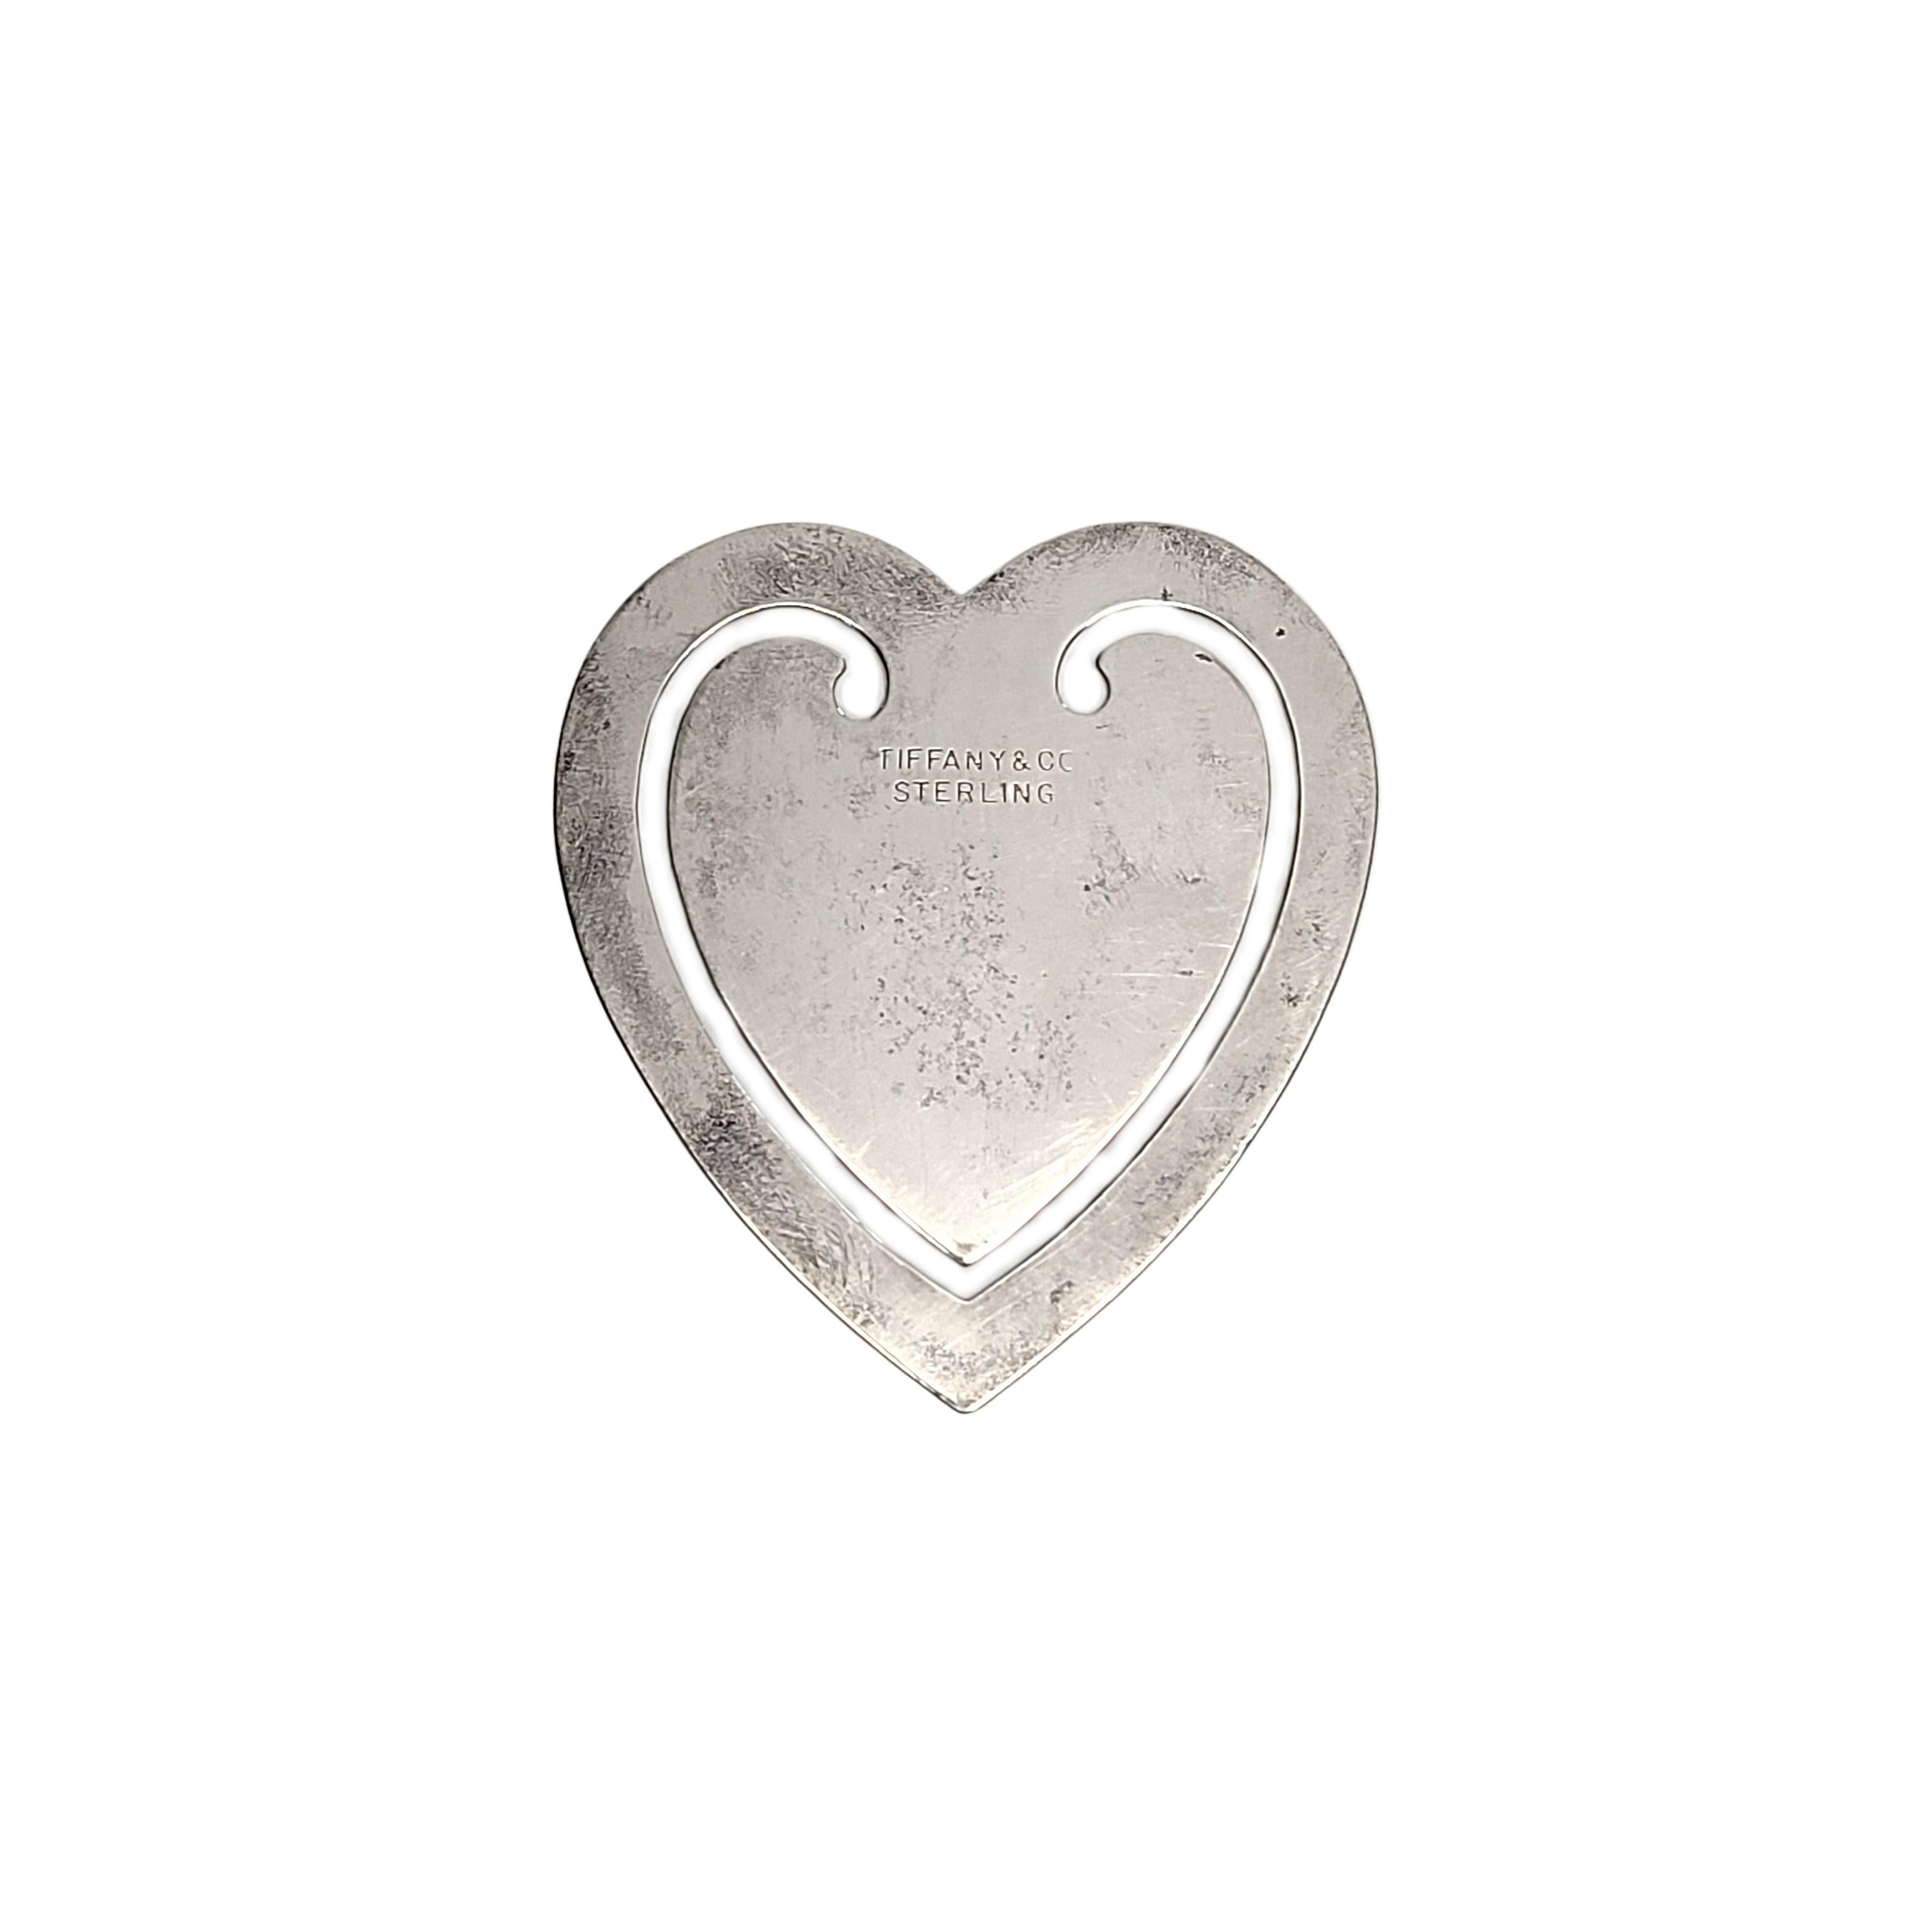 Tiffany & Co sterling silver heart bookmark.

Simple heart design, a perfect piece for any book lover. Does not include Tiffany & Co box or pouch.

Measures approx 2 1/4